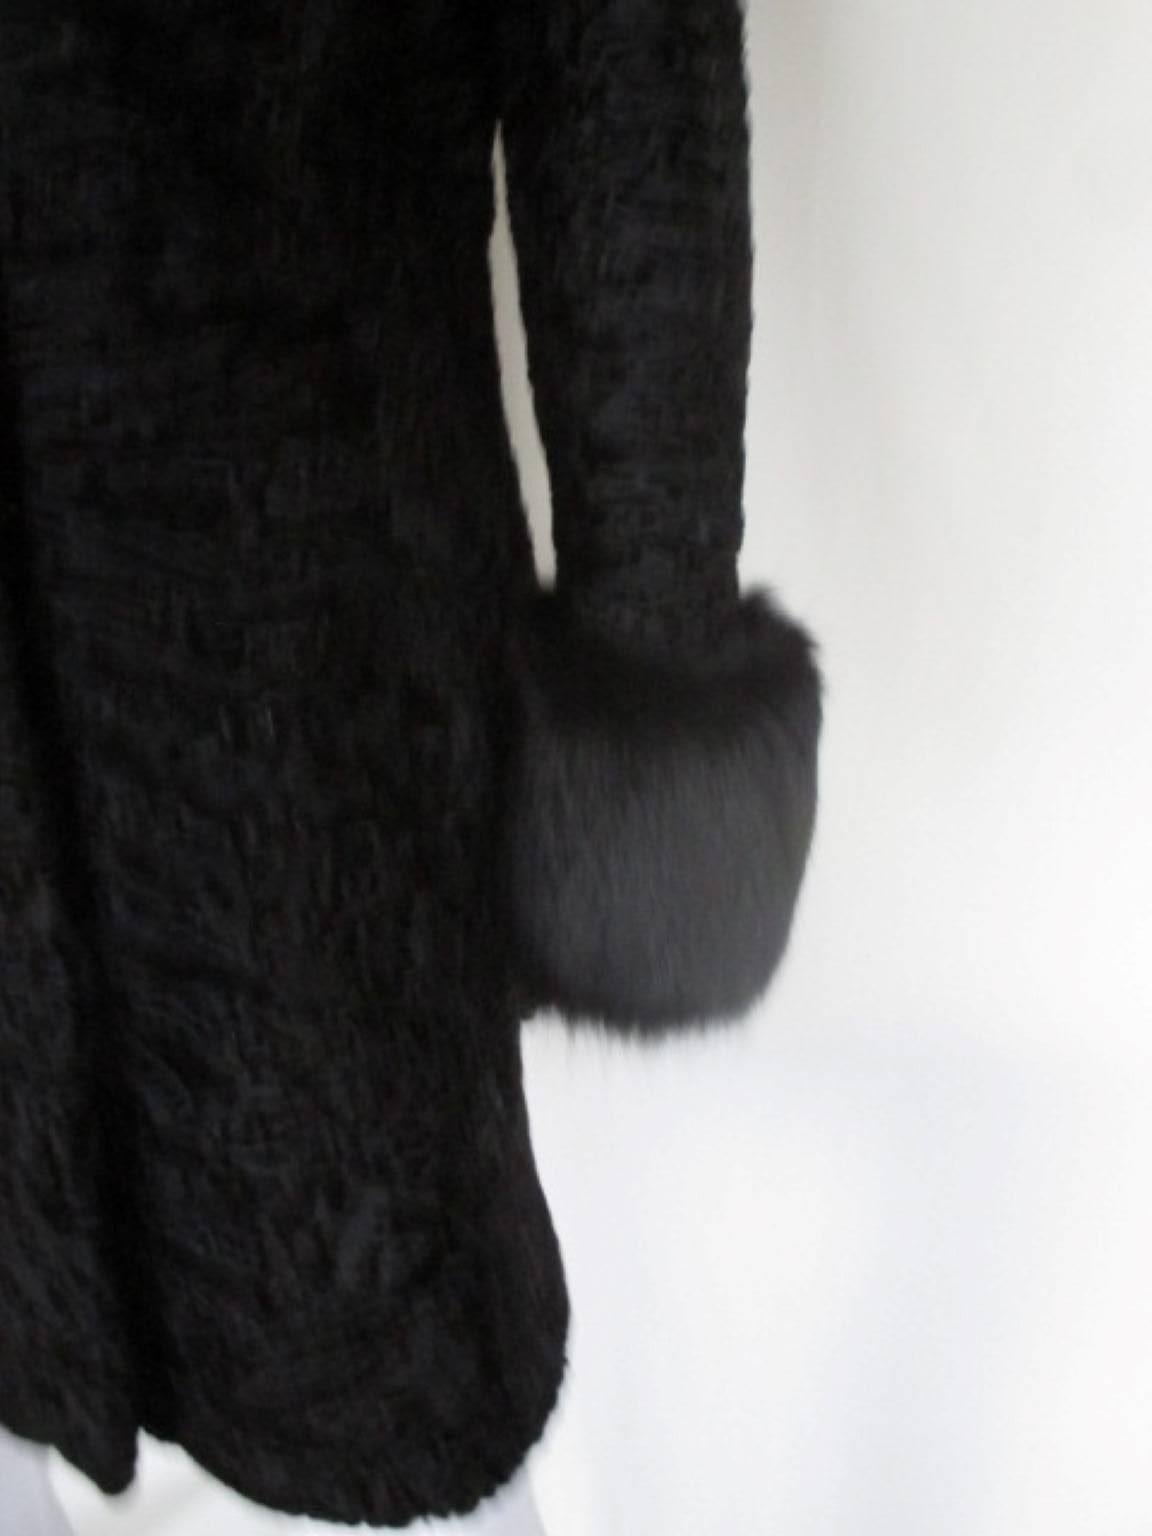 This coat is made of Swakara persian lamb trimmed with black fox at the collar and sleeves, it has 2 pockets and 3 closing buttons.
Size: we estimate this coat to fit a modern day medium, US size 10-12 , EU size 40-42, but we always encourage the